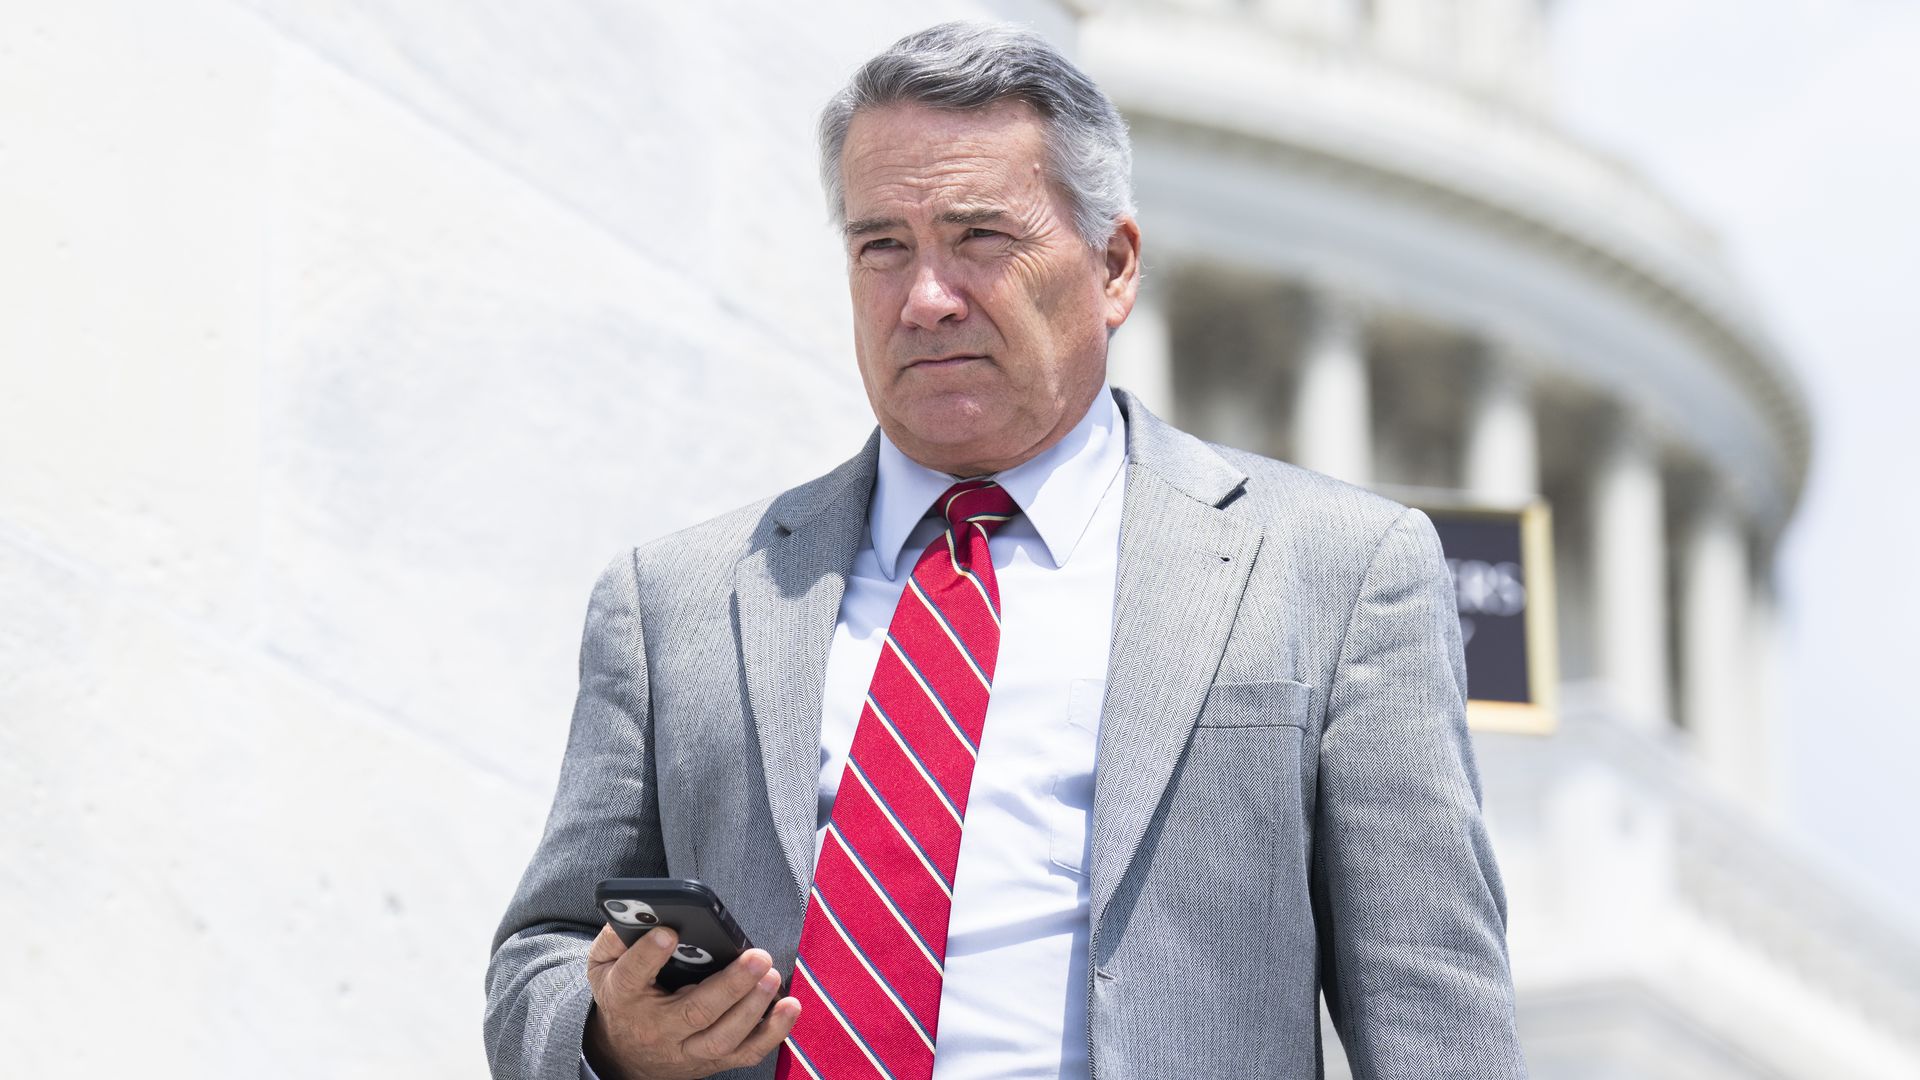 Rep. Jody Hice holding a cell phone